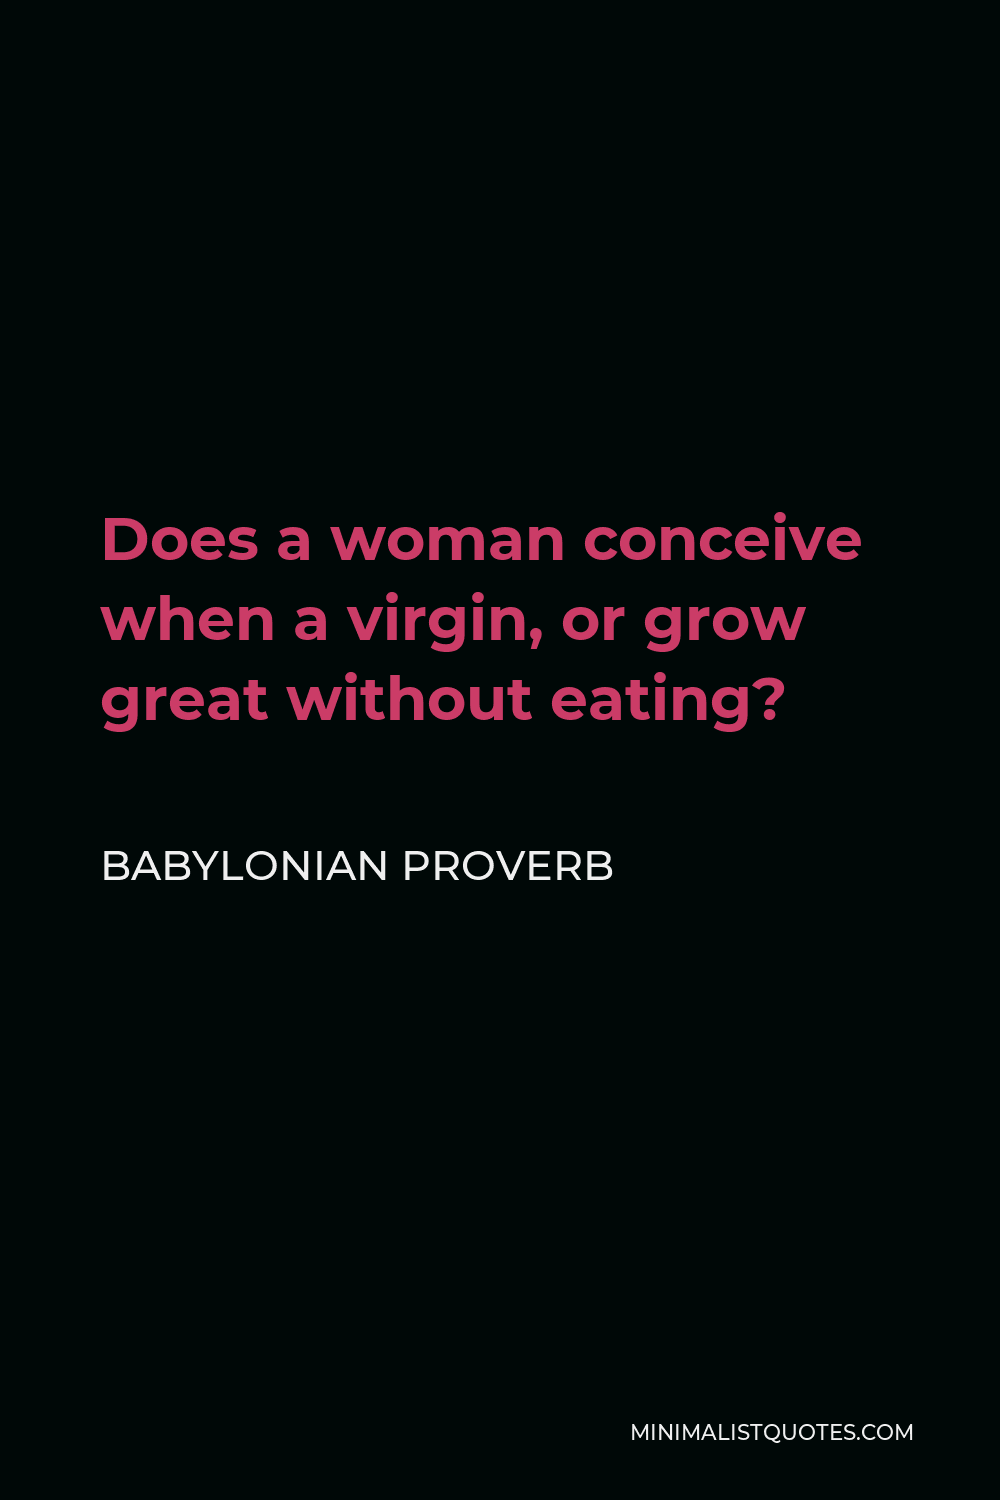 Babylonian Proverb Quote - Does a woman conceive when a virgin, or grow great without eating?